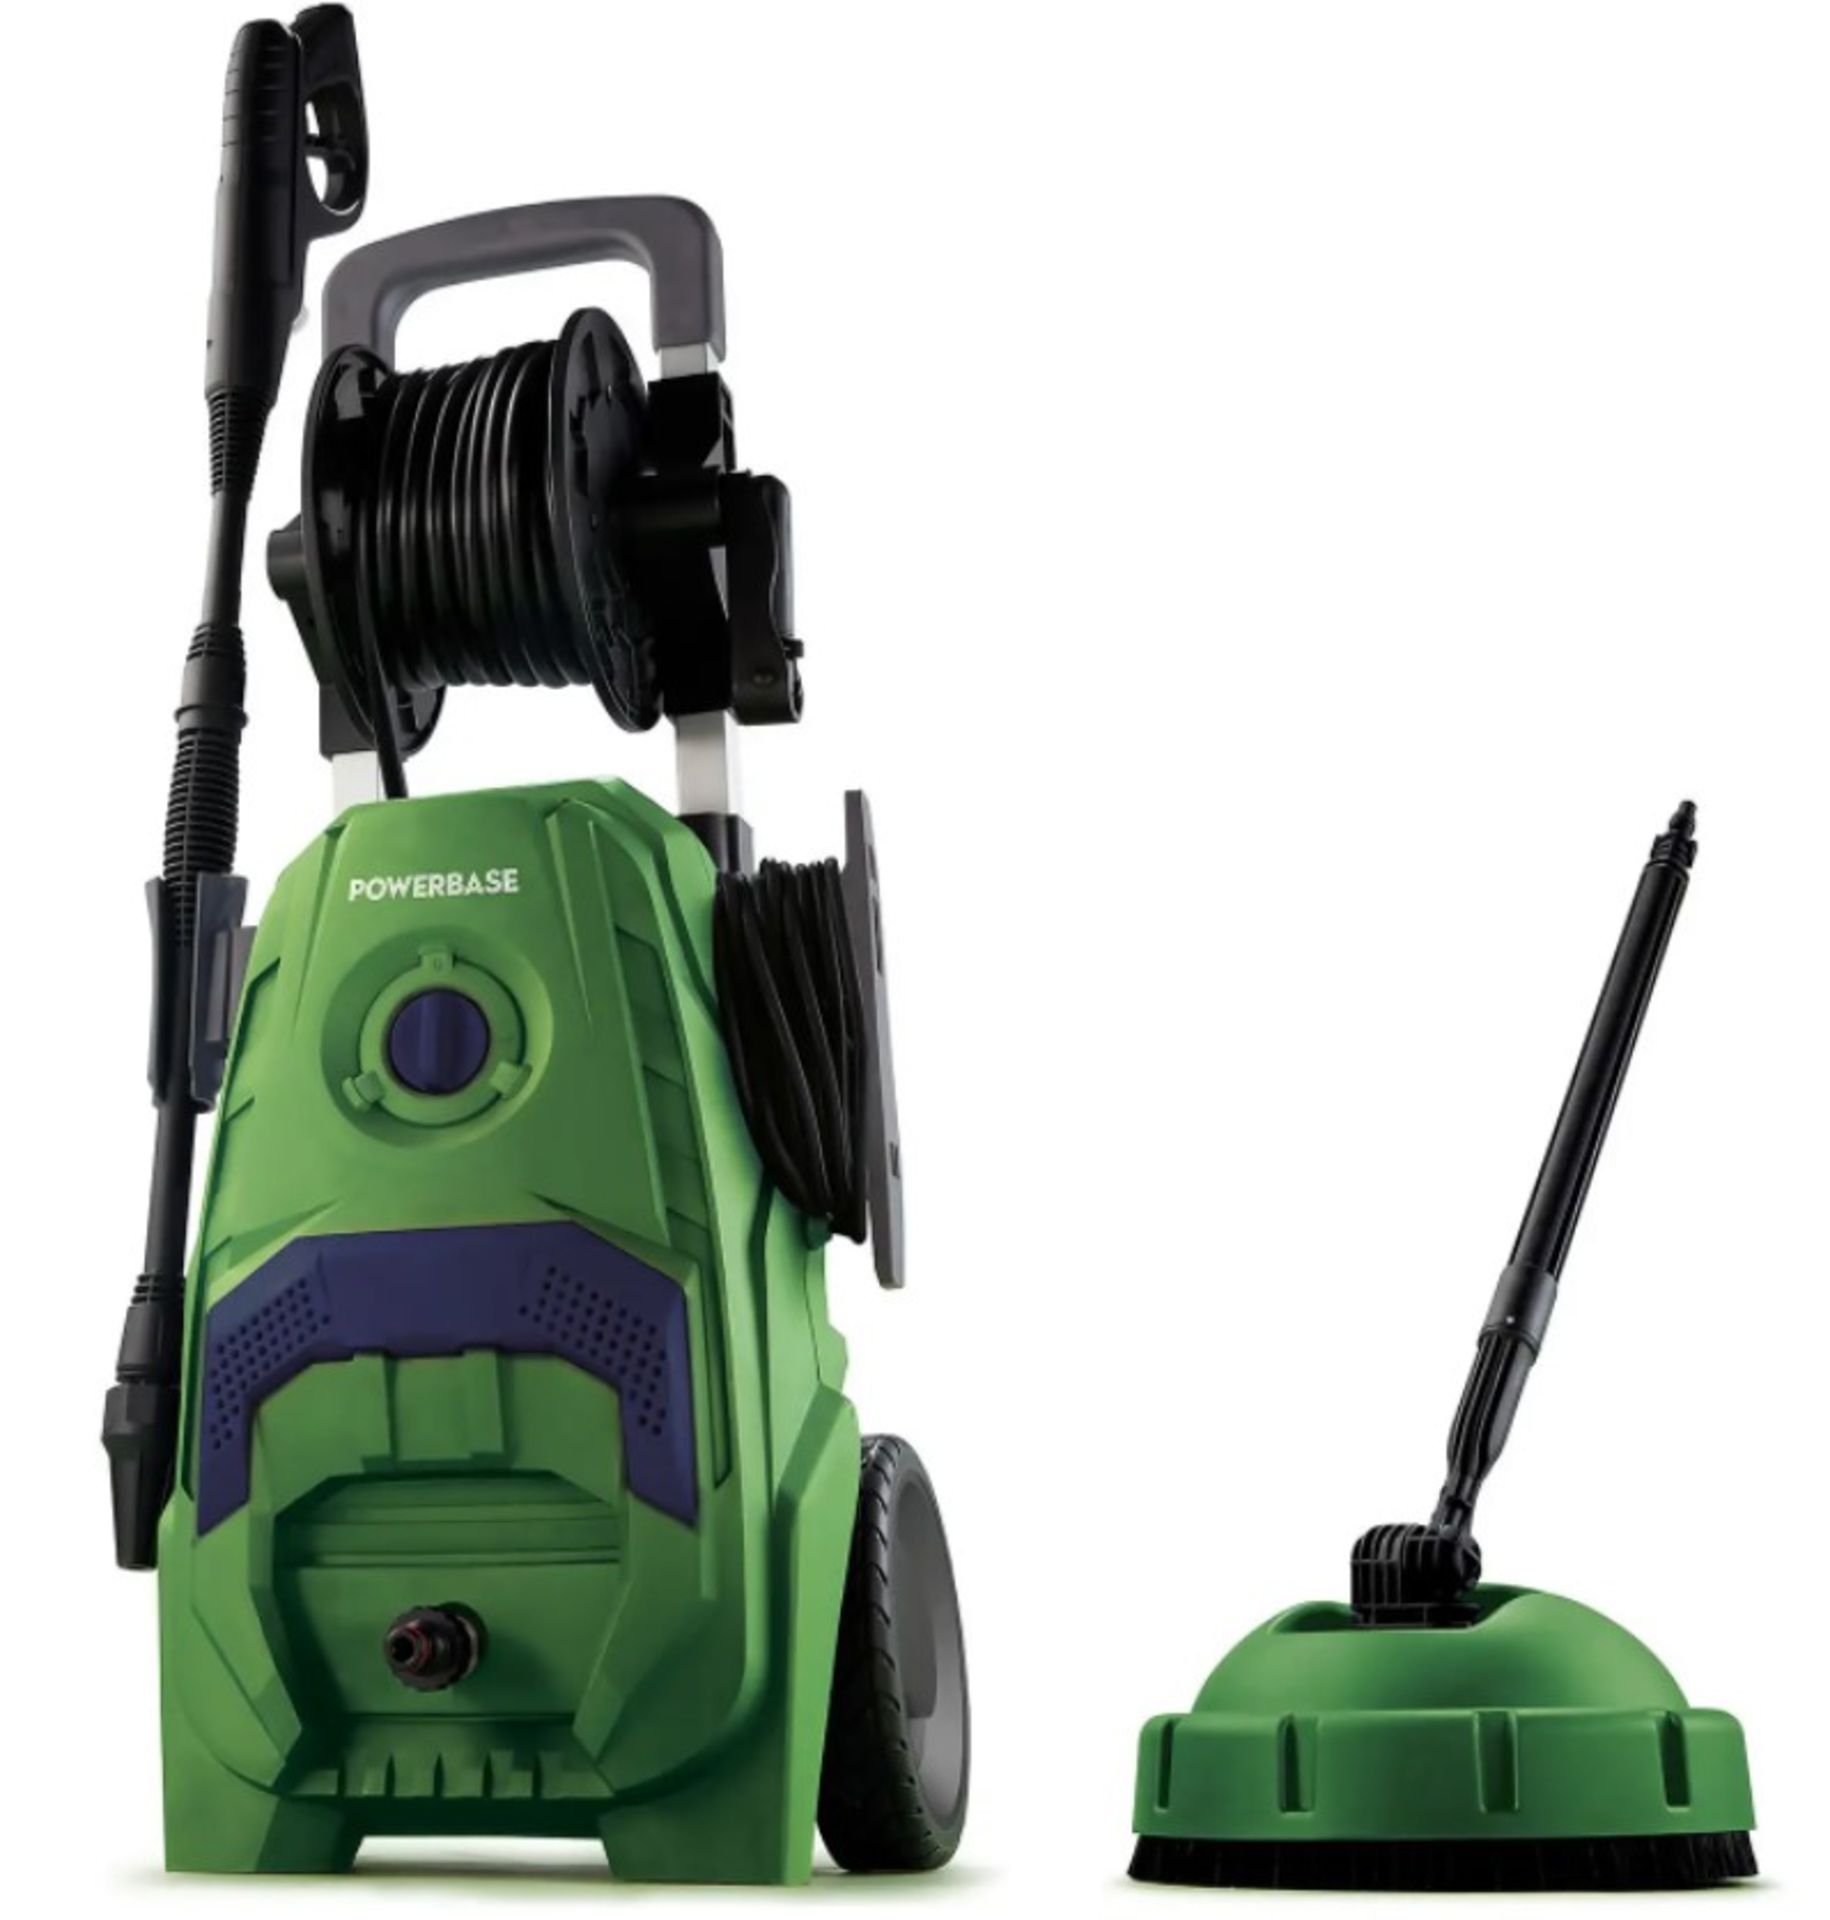 (46/2I) Lot RRP £277. 3x Items. 1x Powerbase 2000W Electric Pressure Washer RRP £159. 2x Powerbas... - Image 5 of 6